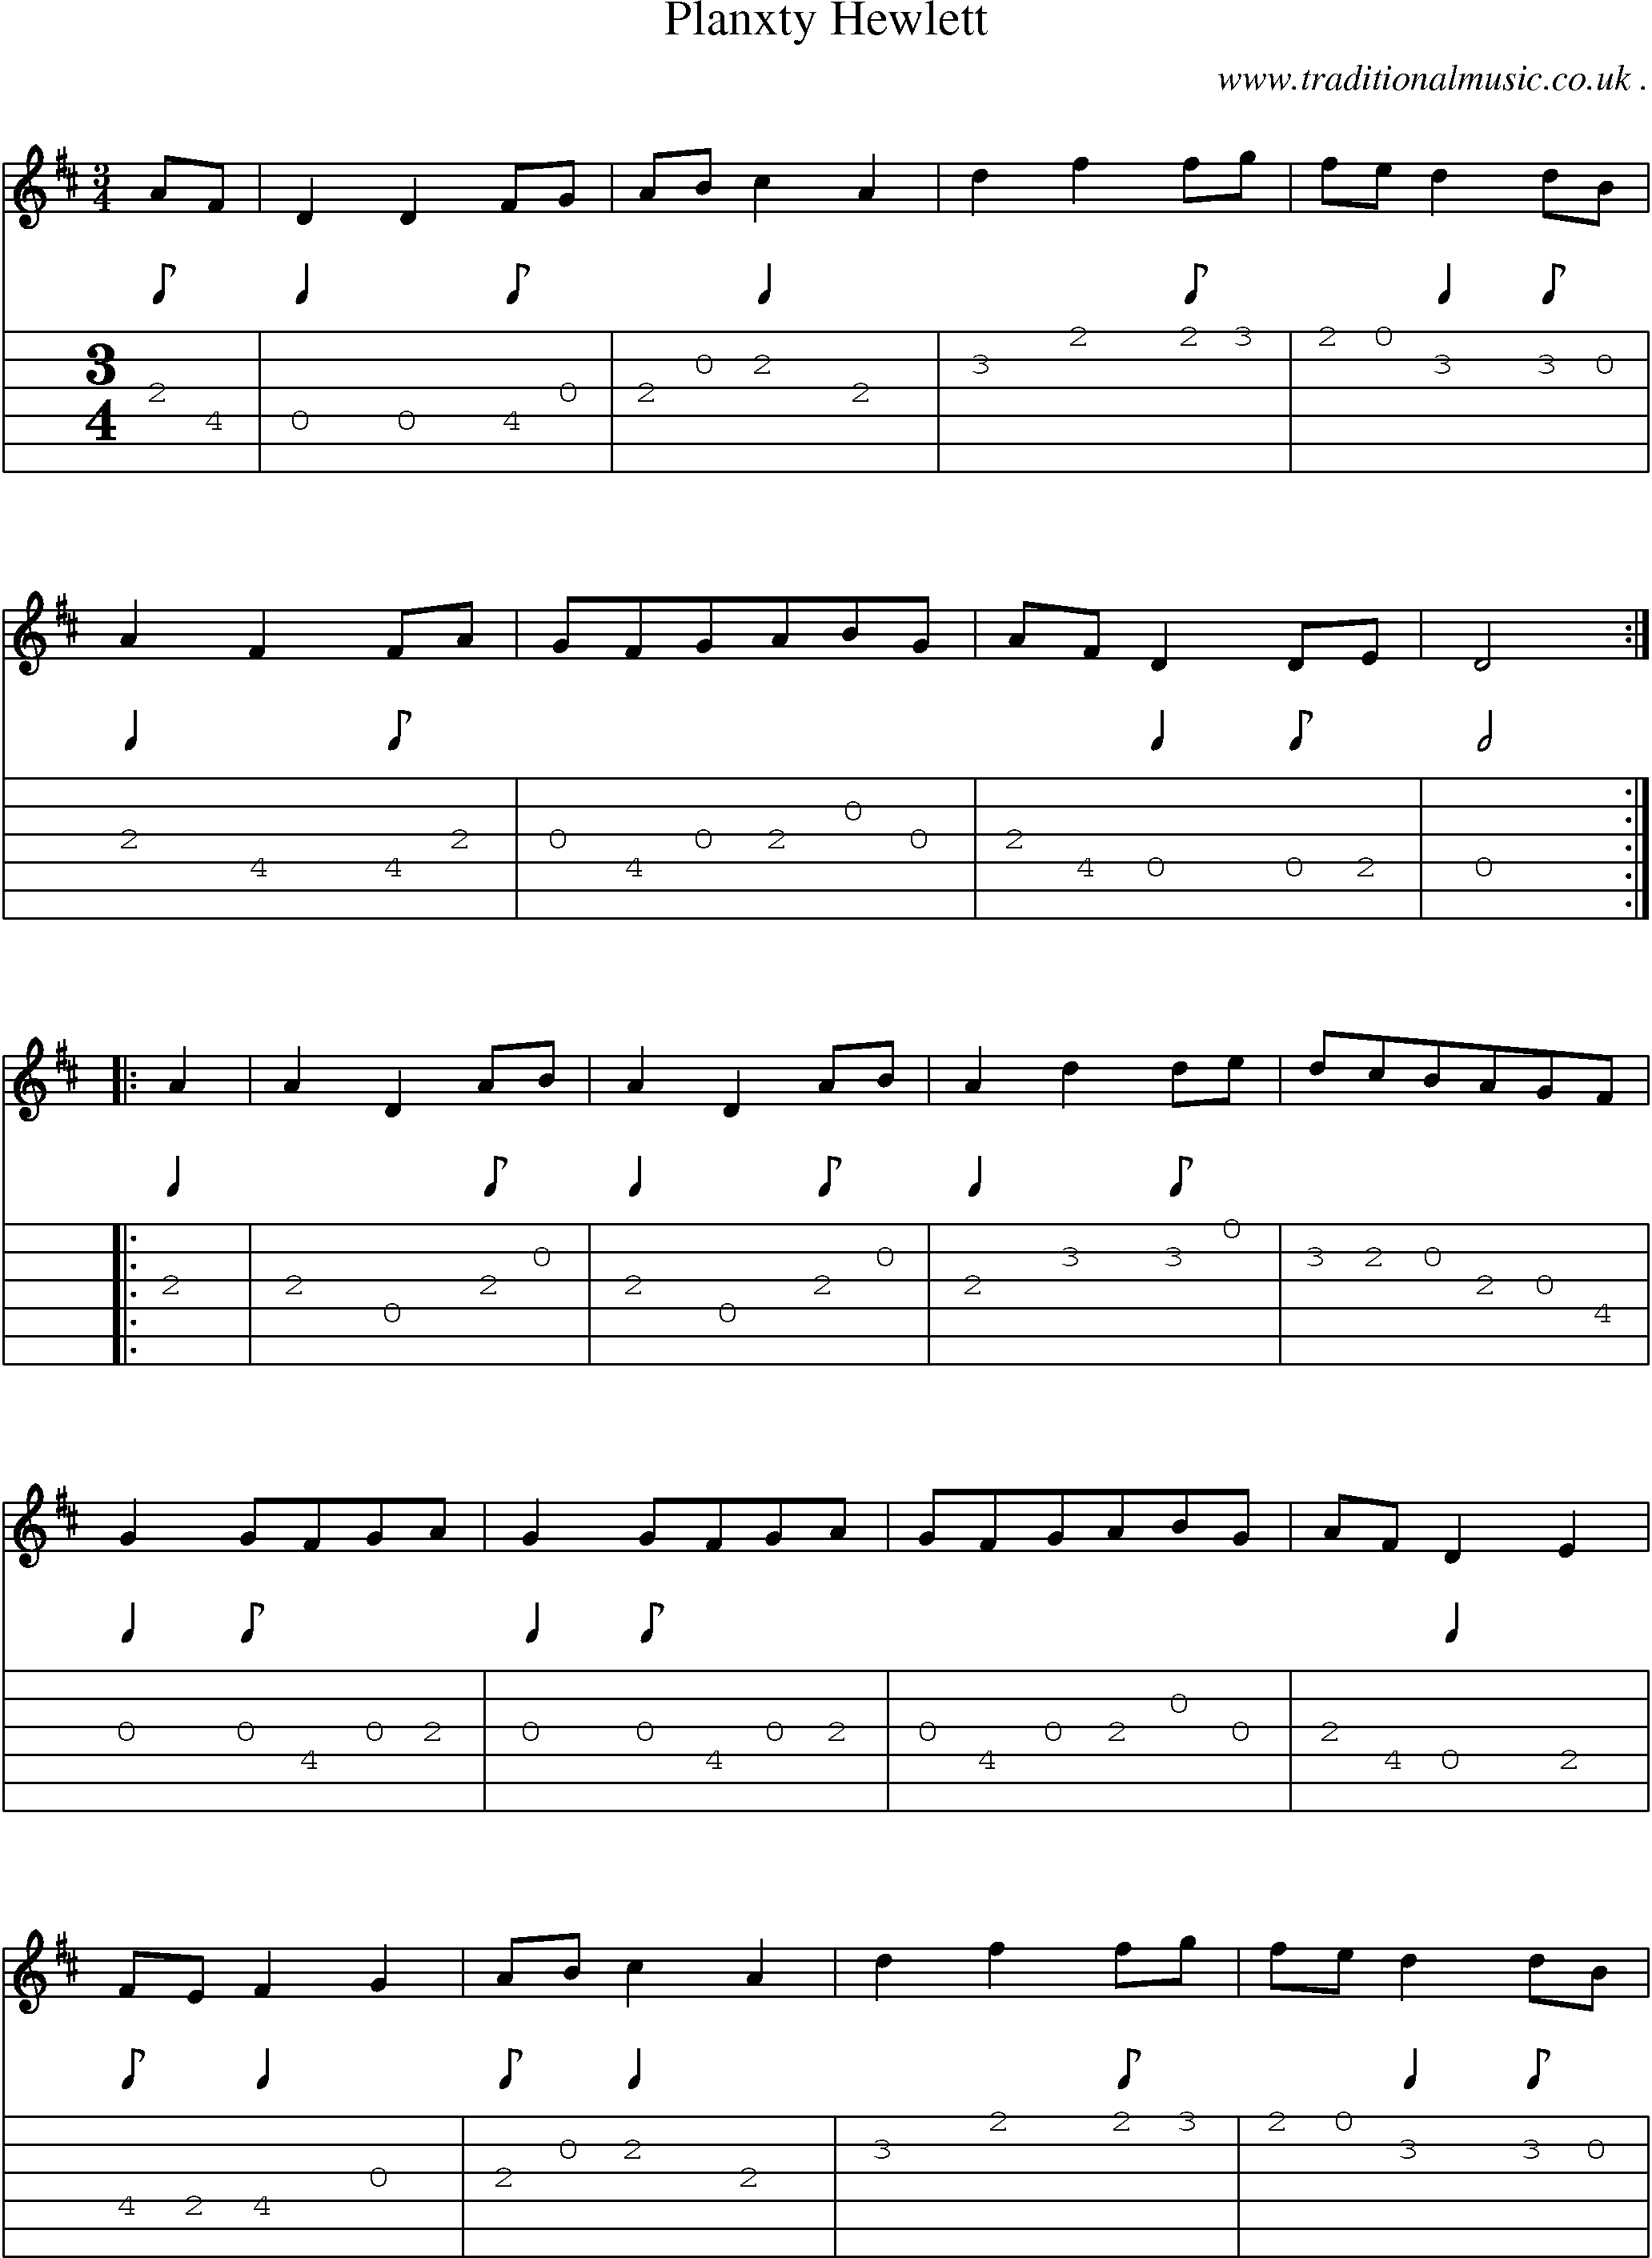 Sheet-Music and Guitar Tabs for Planxty Hewlett